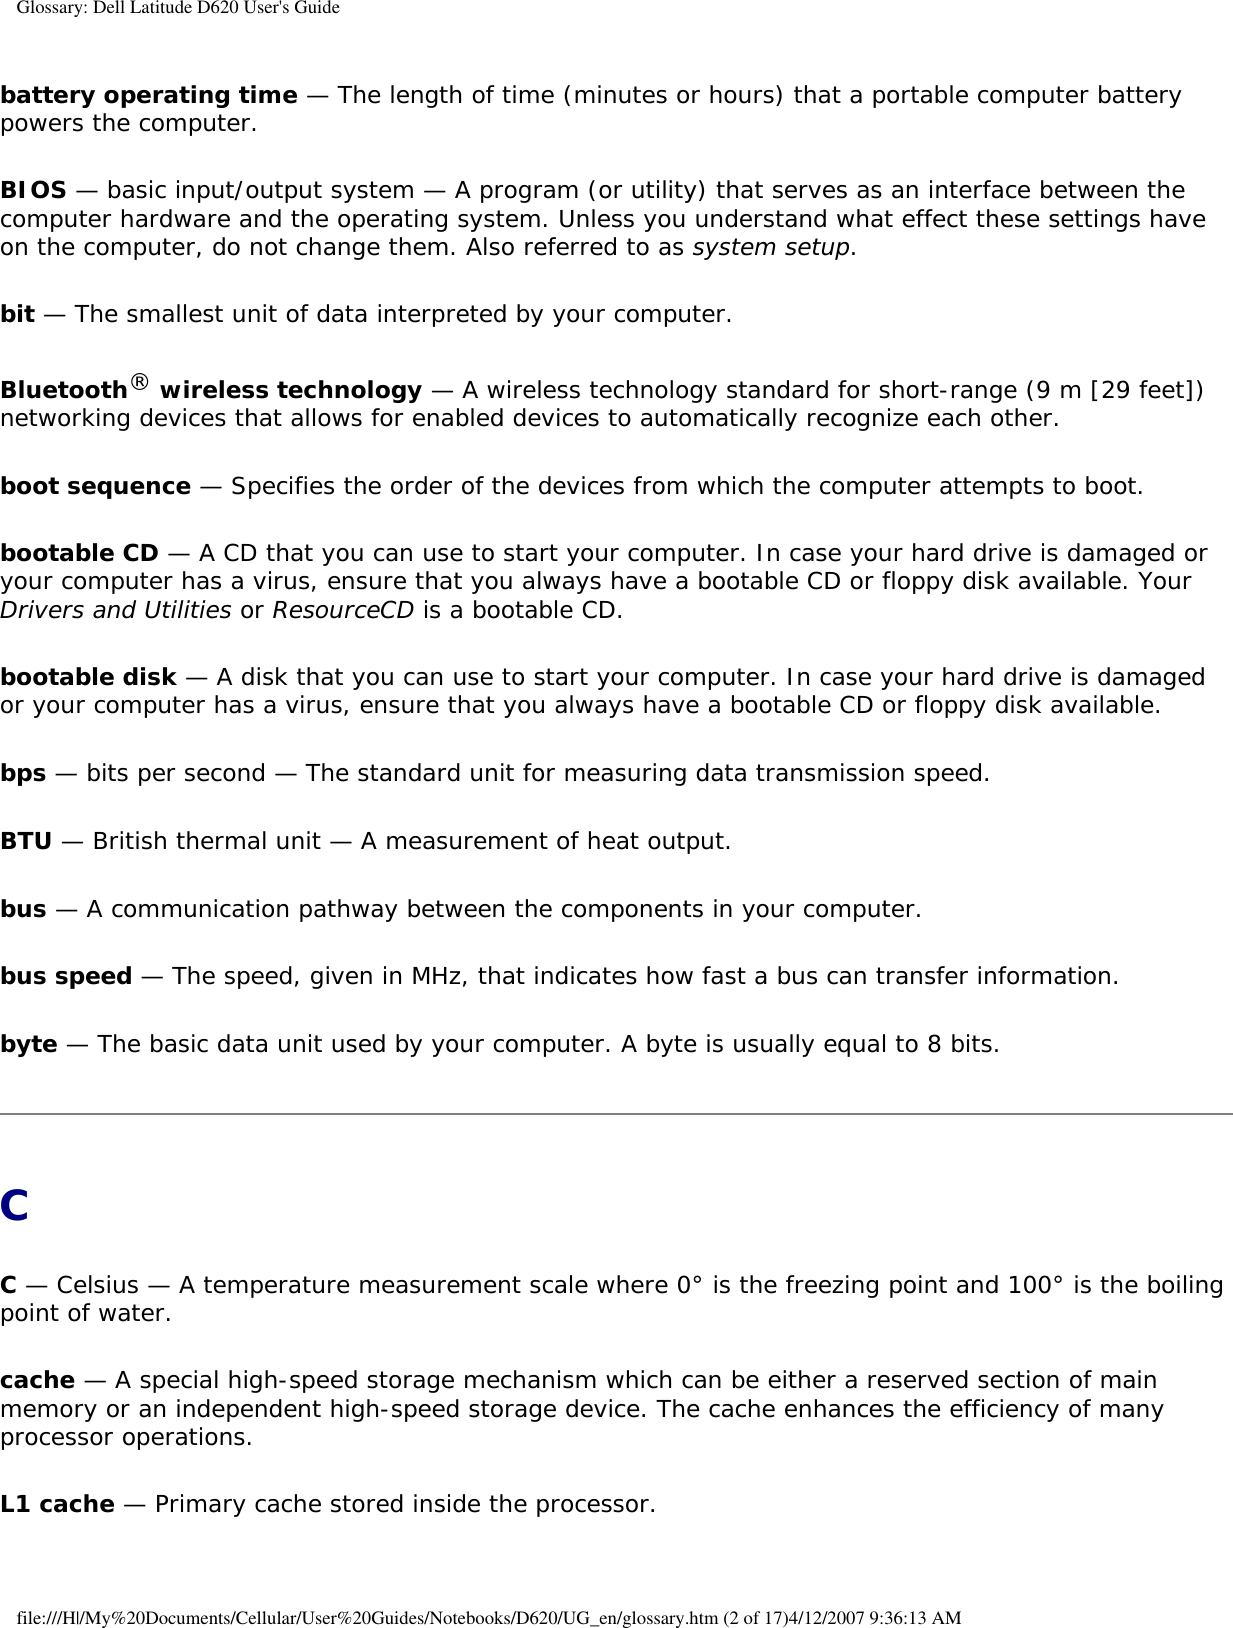 Glossary: Dell Latitude D620 User&apos;s Guidebattery operating time — The length of time (minutes or hours) that a portable computer battery powers the computer.BIOS — basic input/output system — A program (or utility) that serves as an interface between the computer hardware and the operating system. Unless you understand what effect these settings have on the computer, do not change them. Also referred to as system setup.bit — The smallest unit of data interpreted by your computer.Bluetooth® wireless technology — A wireless technology standard for short-range (9 m [29 feet]) networking devices that allows for enabled devices to automatically recognize each other.boot sequence — Specifies the order of the devices from which the computer attempts to boot.bootable CD — A CD that you can use to start your computer. In case your hard drive is damaged or your computer has a virus, ensure that you always have a bootable CD or floppy disk available. Your Drivers and Utilities or ResourceCD is a bootable CD.bootable disk — A disk that you can use to start your computer. In case your hard drive is damaged or your computer has a virus, ensure that you always have a bootable CD or floppy disk available.bps — bits per second — The standard unit for measuring data transmission speed.BTU — British thermal unit — A measurement of heat output.bus — A communication pathway between the components in your computer.bus speed — The speed, given in MHz, that indicates how fast a bus can transfer information.byte — The basic data unit used by your computer. A byte is usually equal to 8 bits.CC — Celsius — A temperature measurement scale where 0° is the freezing point and 100° is the boiling point of water.cache — A special high-speed storage mechanism which can be either a reserved section of main memory or an independent high-speed storage device. The cache enhances the efficiency of many processor operations.L1 cache — Primary cache stored inside the processor.file:///H|/My%20Documents/Cellular/User%20Guides/Notebooks/D620/UG_en/glossary.htm (2 of 17)4/12/2007 9:36:13 AM